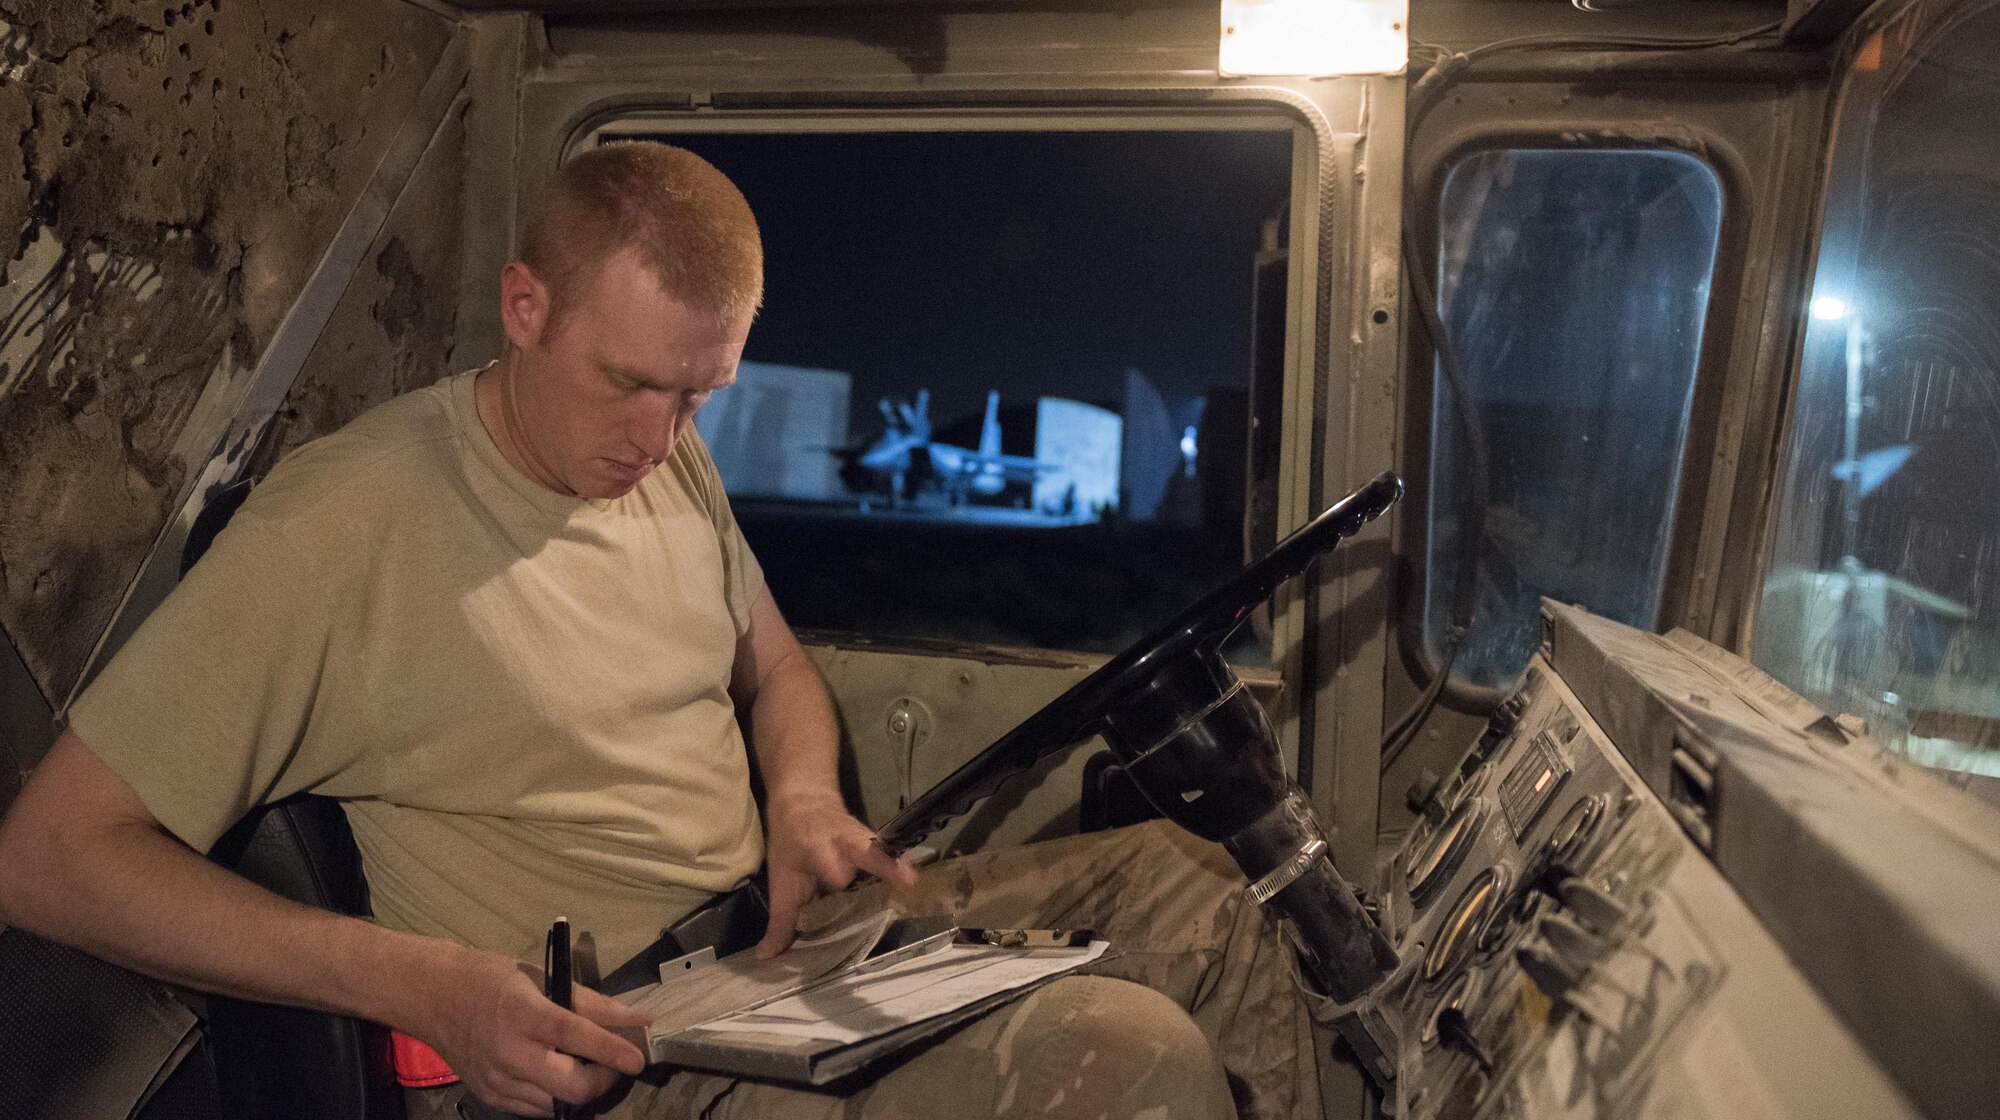 Staff Sgt. Kenneth Zaun, 332nd Expeditionary Logistics Readiness Squadron fuels flight controller, fills out paperwork prior to fueling an F-15E Strike Eagle, July 22, 2017 in Southwest Asia. Within 20 minutes of landing, members of the 332nd ELRS are in place to refuel aircraft for its next mission. (U.S. Air Force photo/Senior Airman Damon Kasberg)